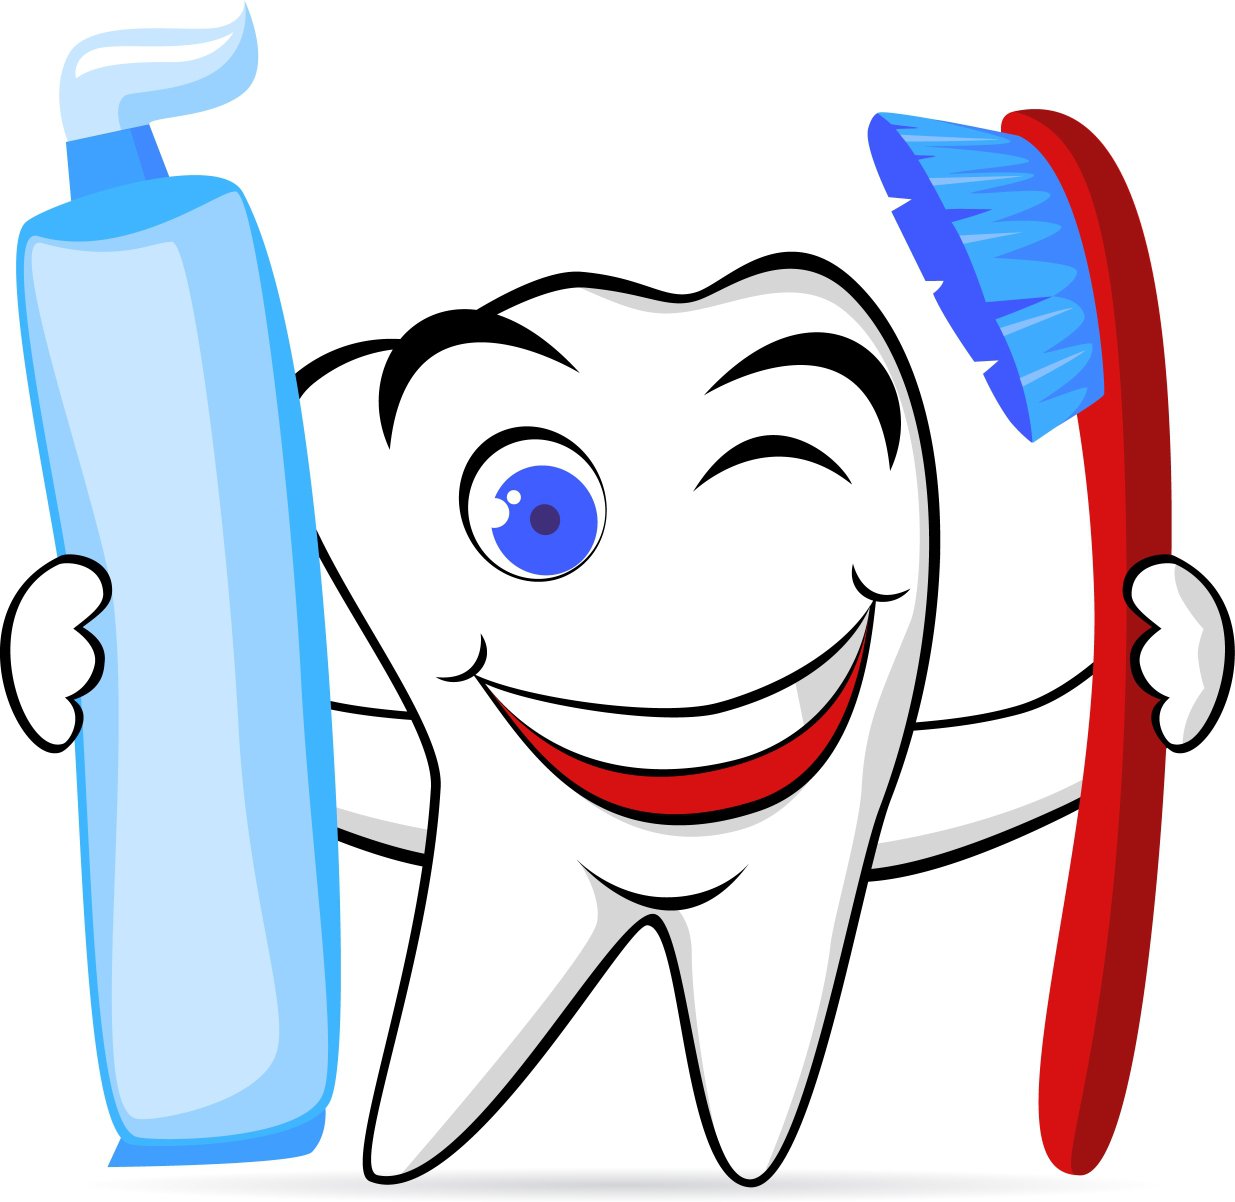 Molar tooth clipart